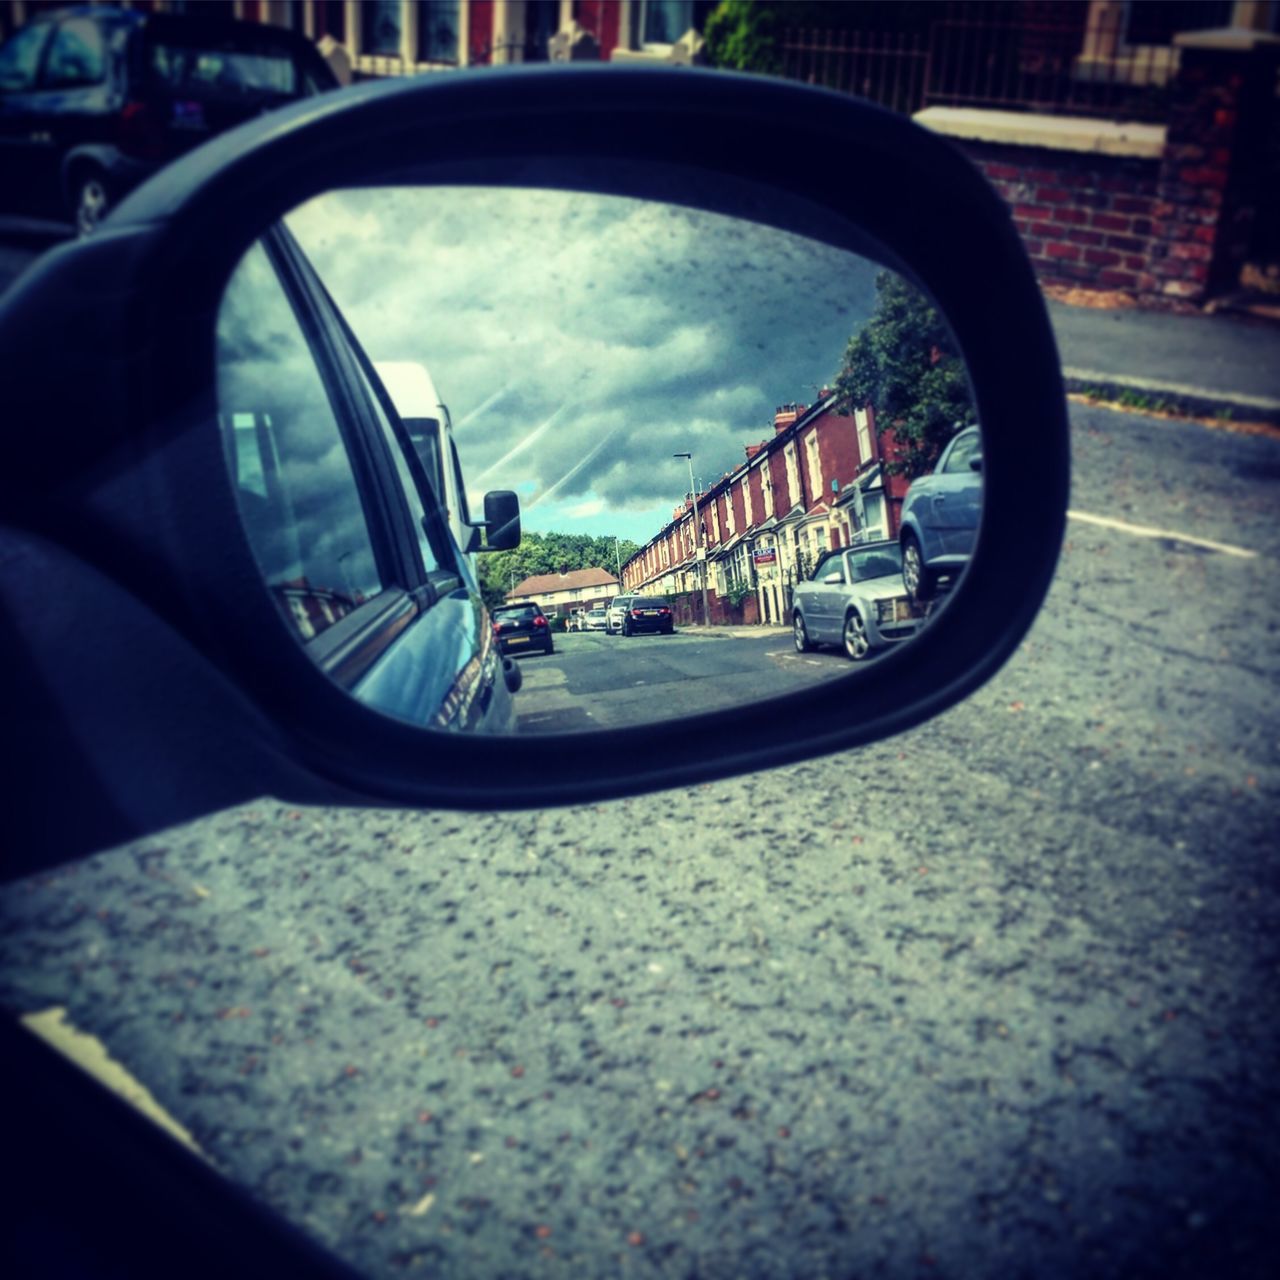 REFLECTION OF SIDE-VIEW MIRROR OF CAR ON WINDSHIELD